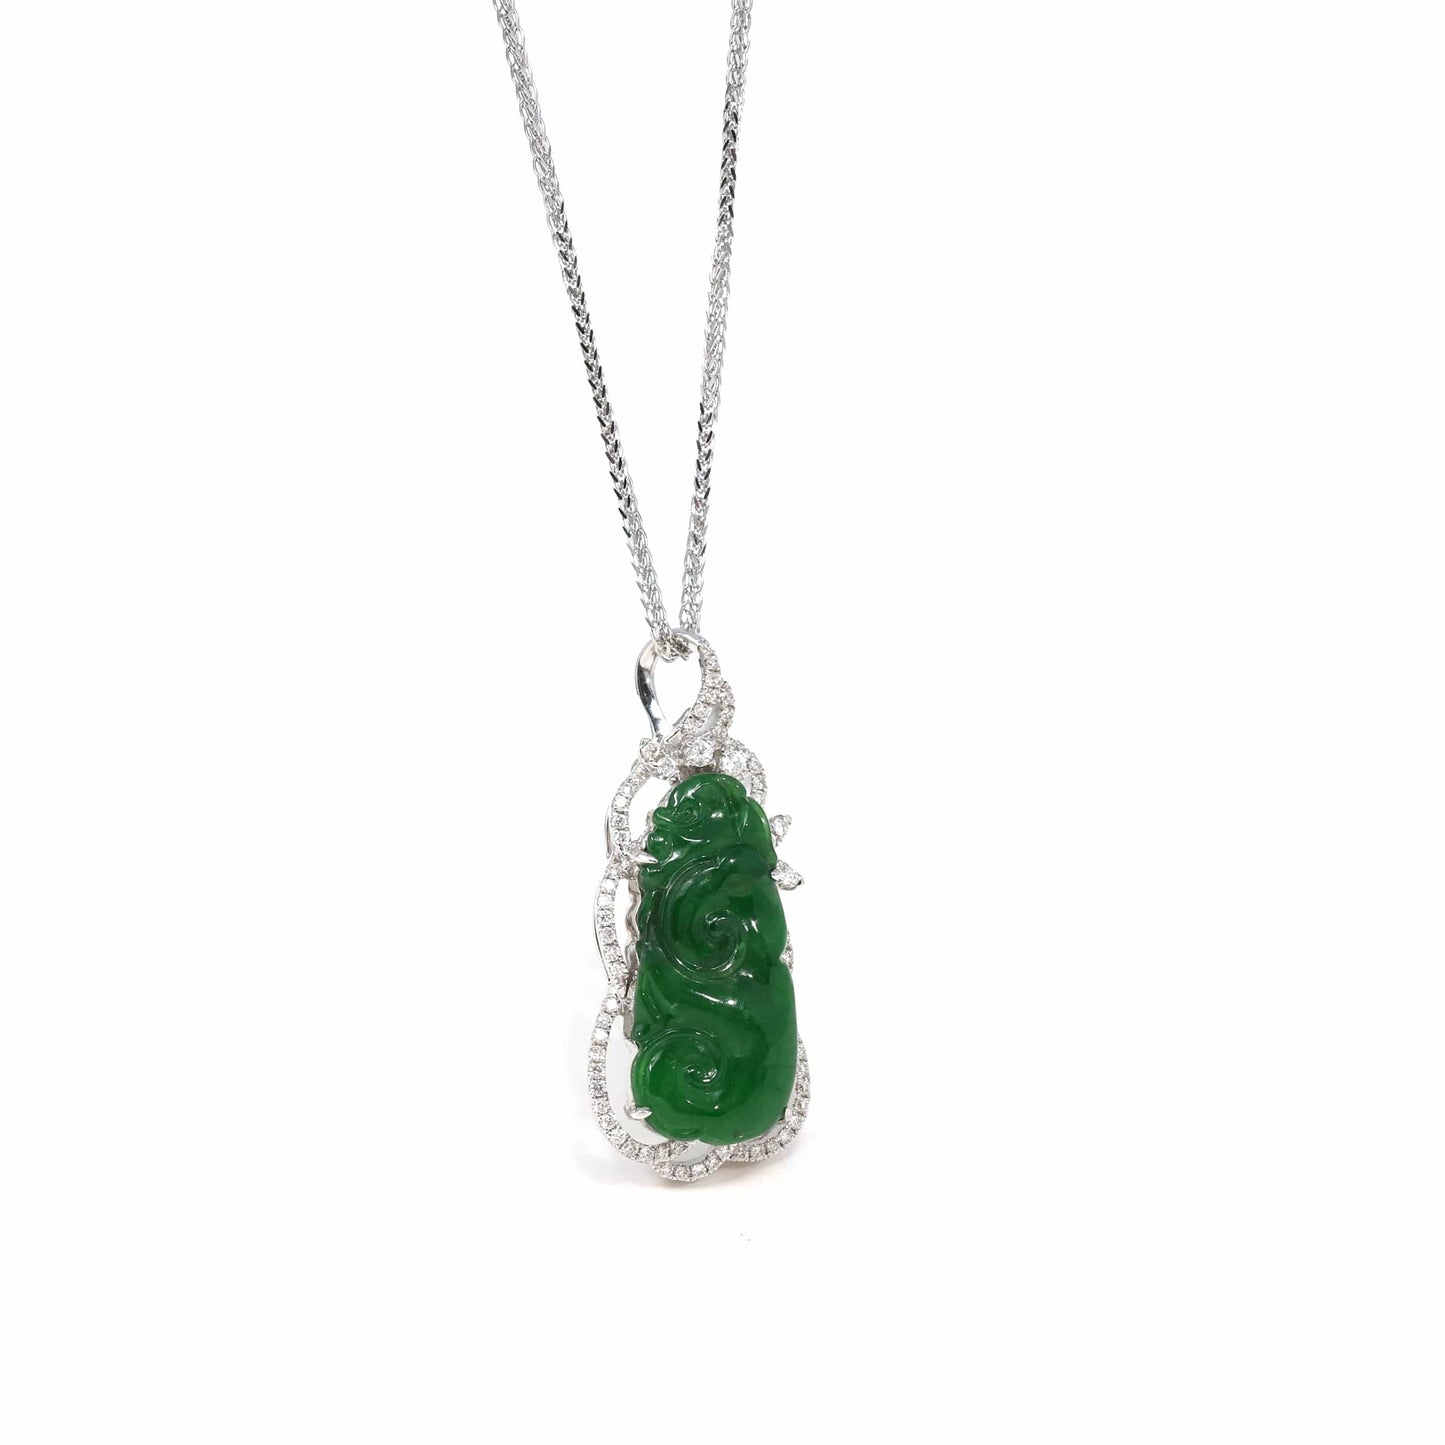 RealJade Co. 18k Gold Jadeite Necklace 18K White Gold High-End Imperial Jadeite Jade"As you wish: RuYi" Necklace with Diamonds